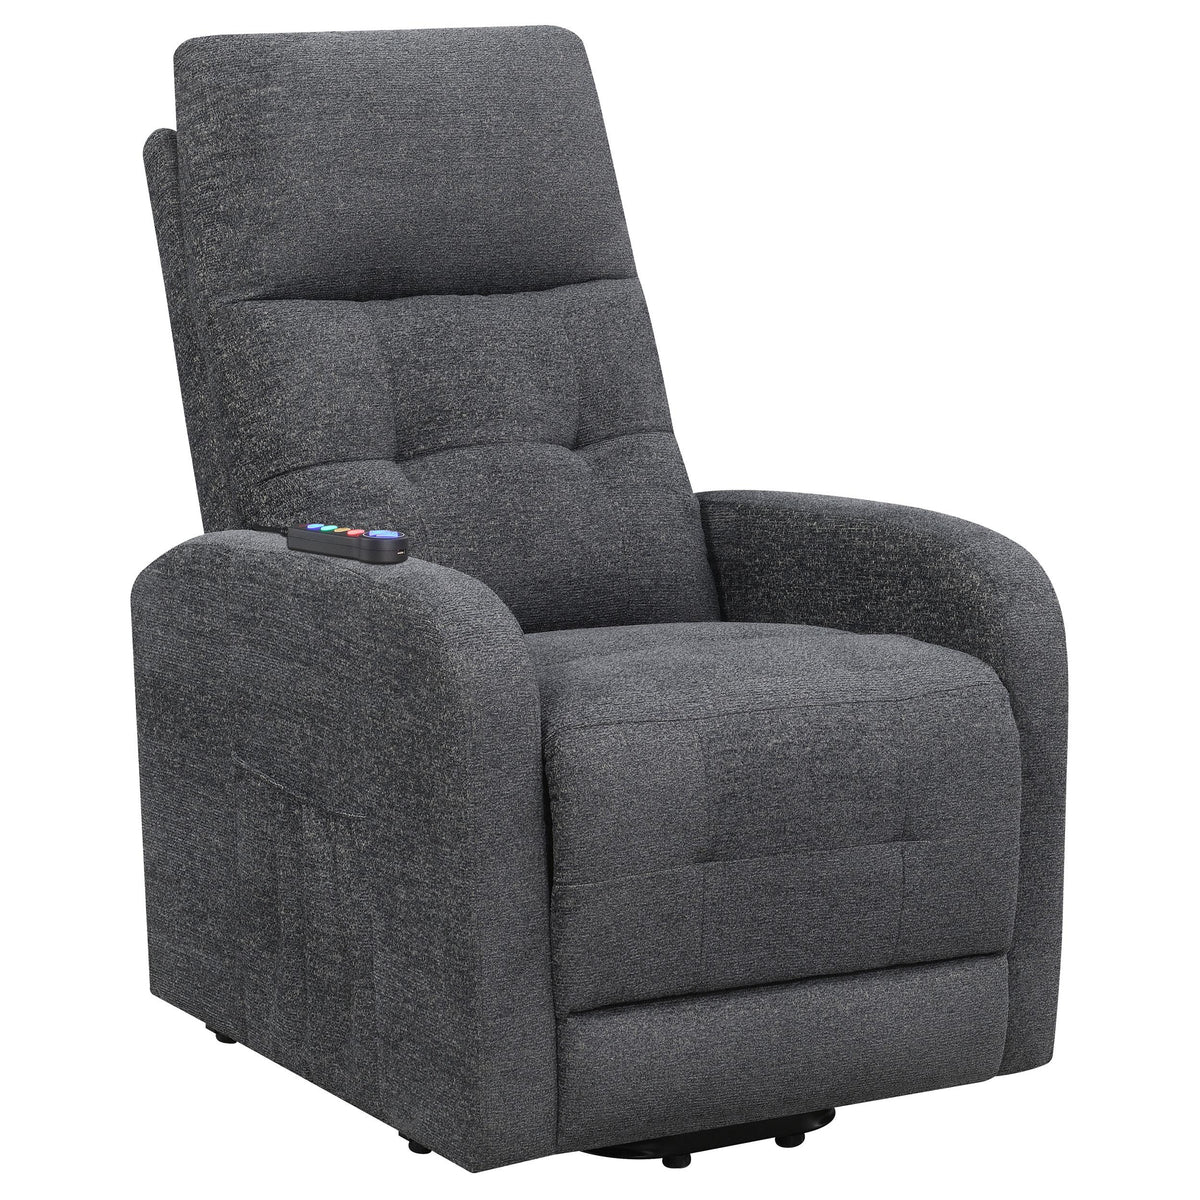 Howie Tufted Upholstered Power Lift Recliner Charcoal Howie Tufted Upholstered Power Lift Recliner Charcoal Half Price Furniture